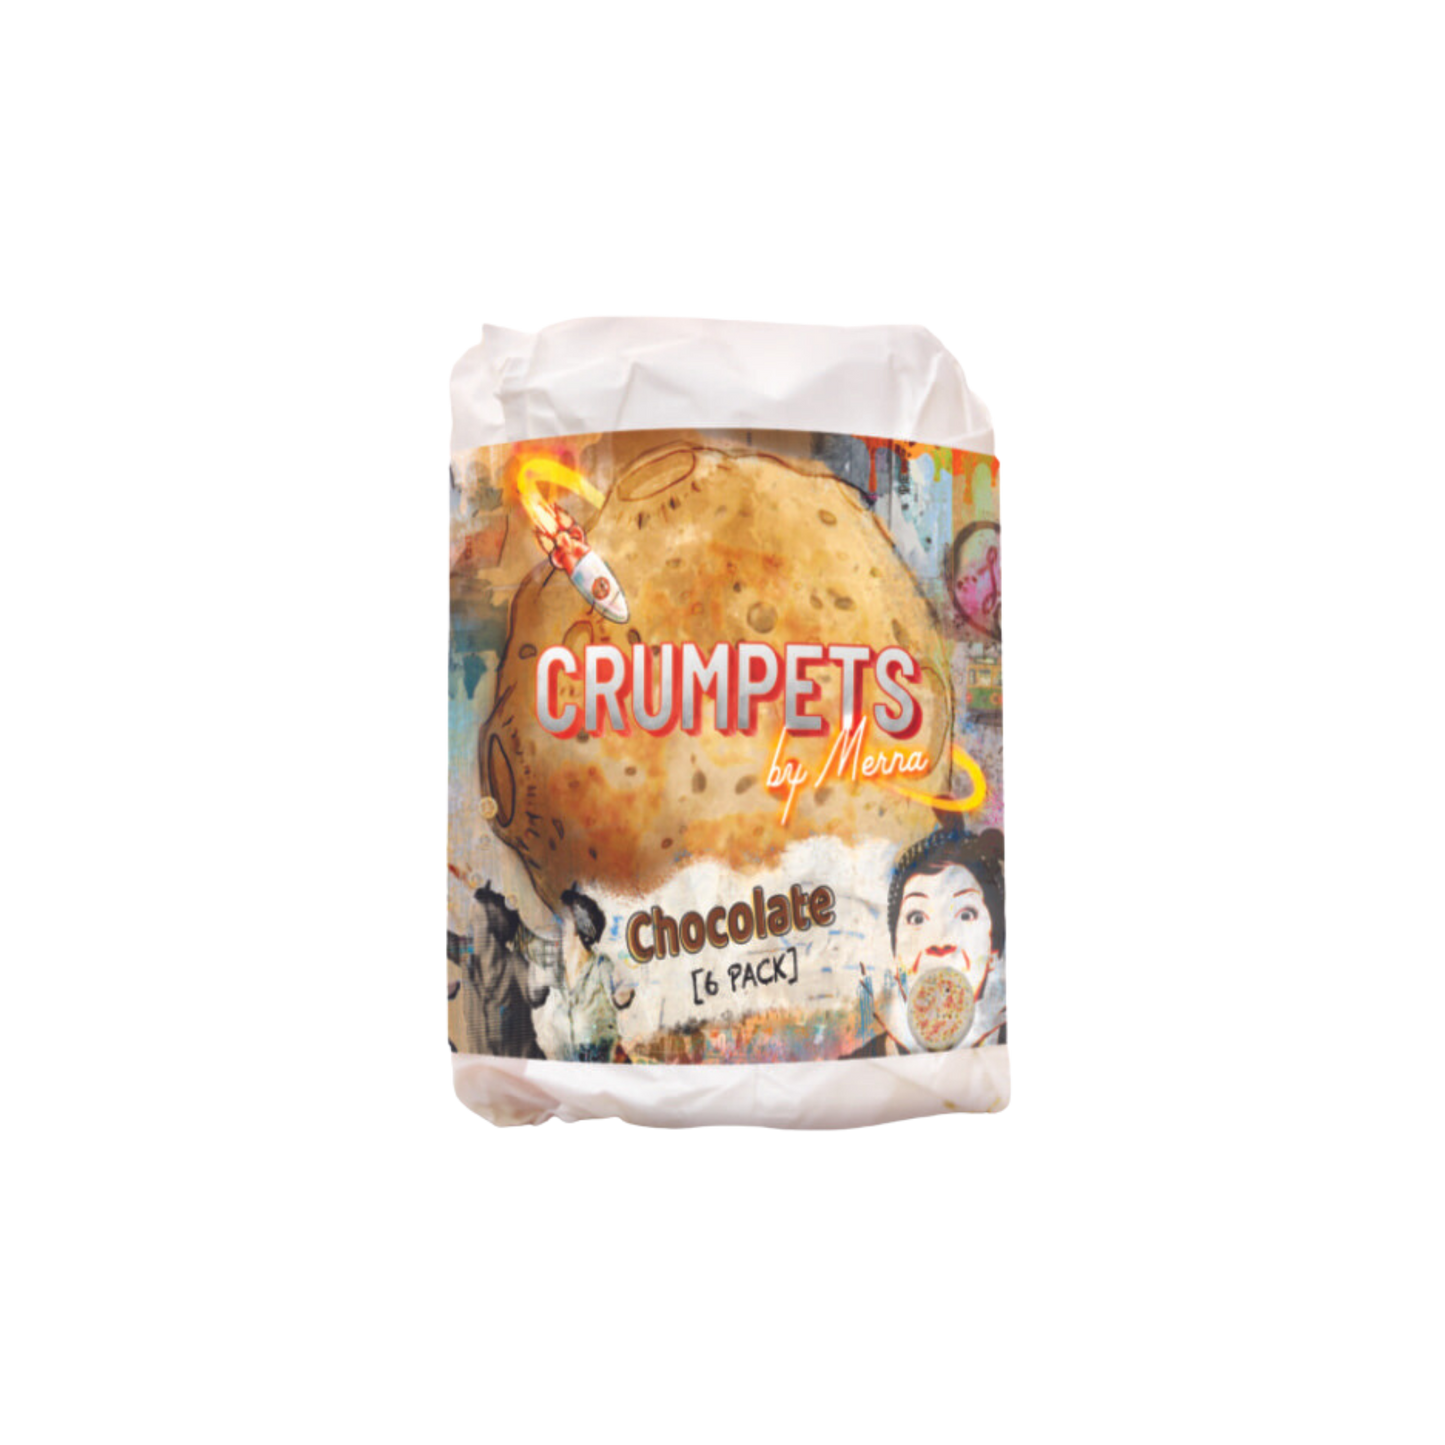 Crumpets by Merna - Chocolate (6 Pack)